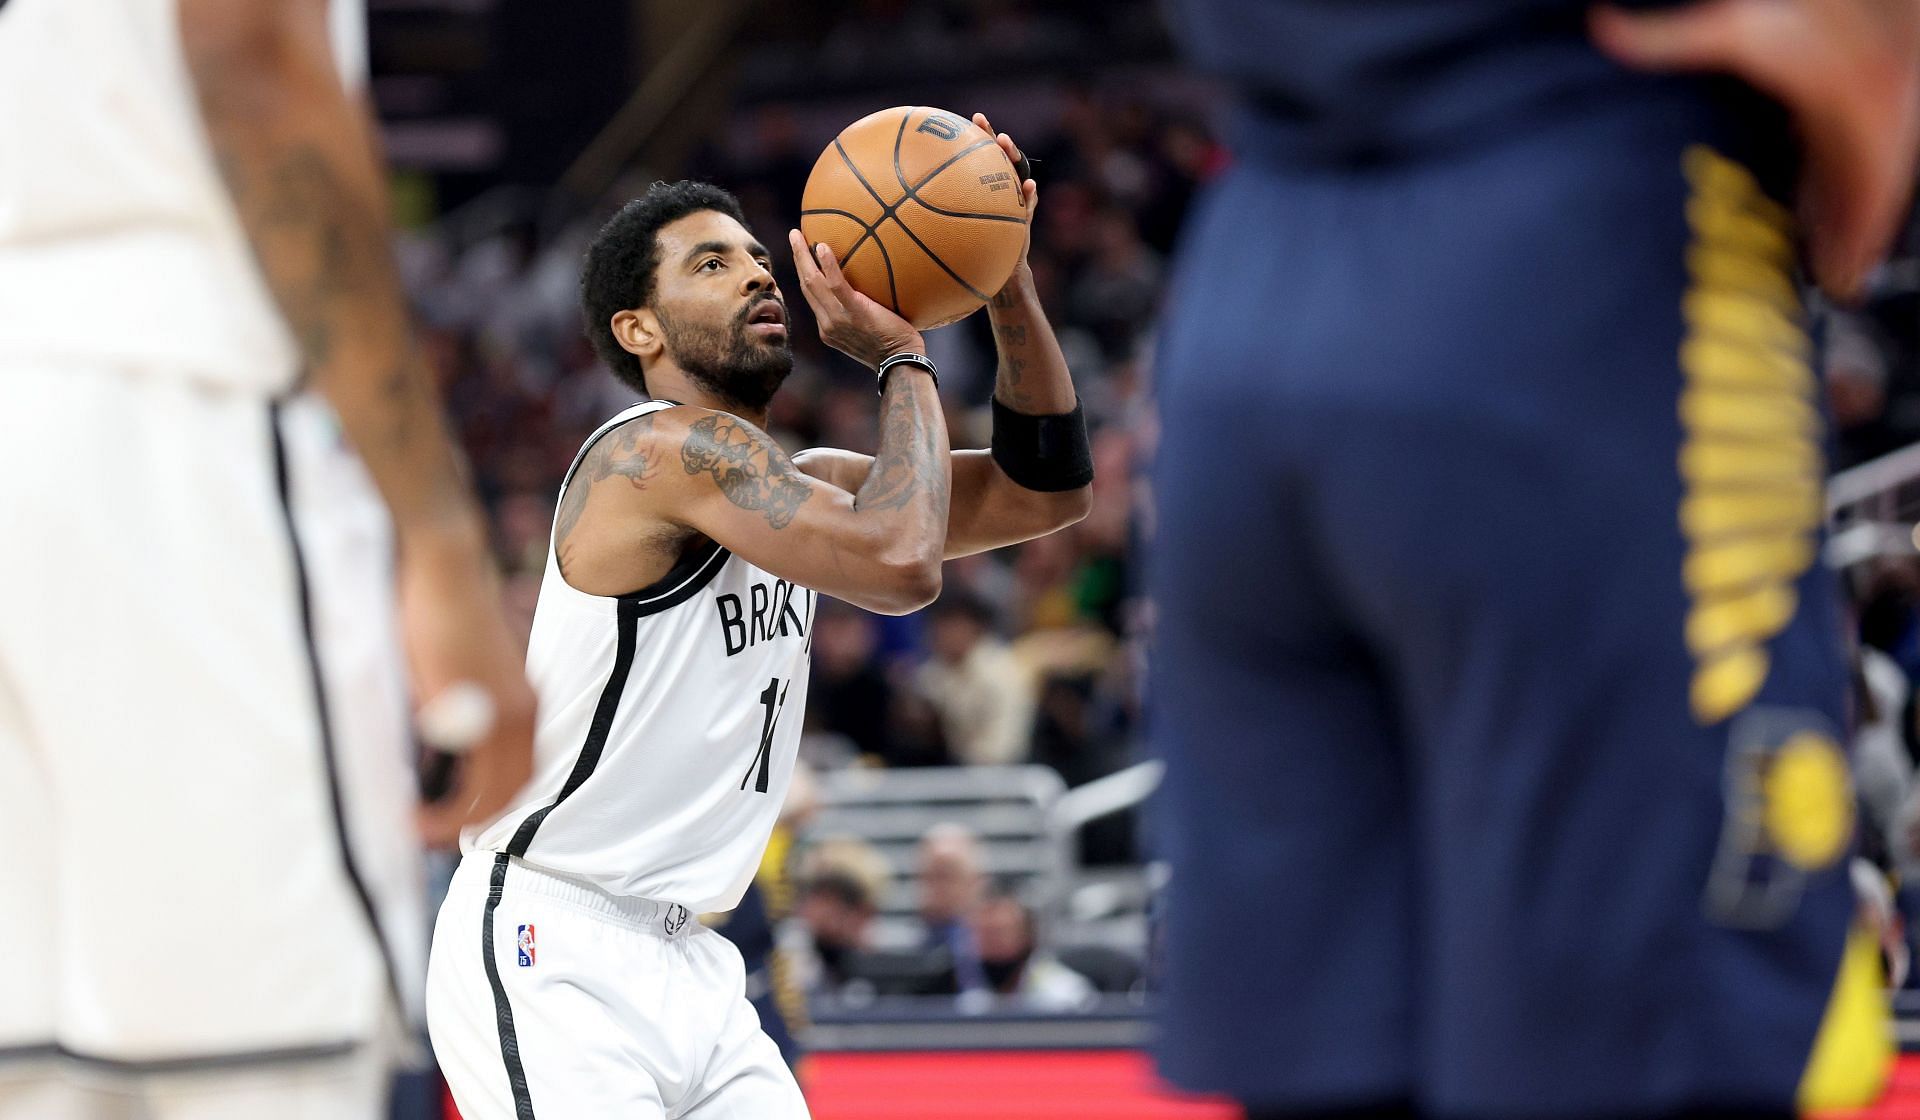 Brooklyn Nets v Indiana Pacers; Kyrie Irving pulls up at the line